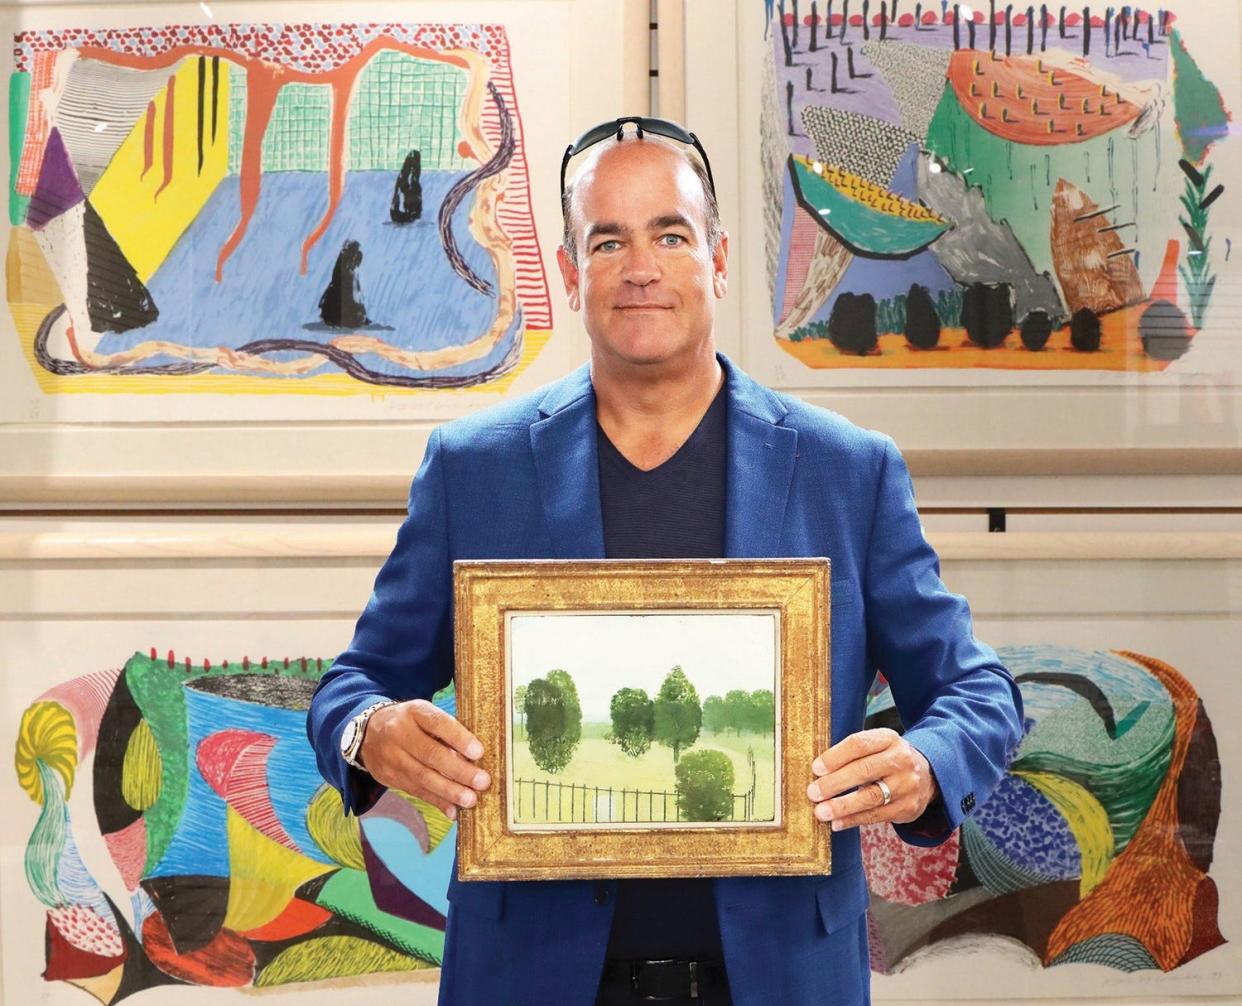 The summer semester at the Osher Lifelong Learning Institute at Ringling College features single-session courses, tours, presentations, movies, and hands-on programs, including What’s it Worth? with Andrew Ford, an antique and fine art acquisitions expert.